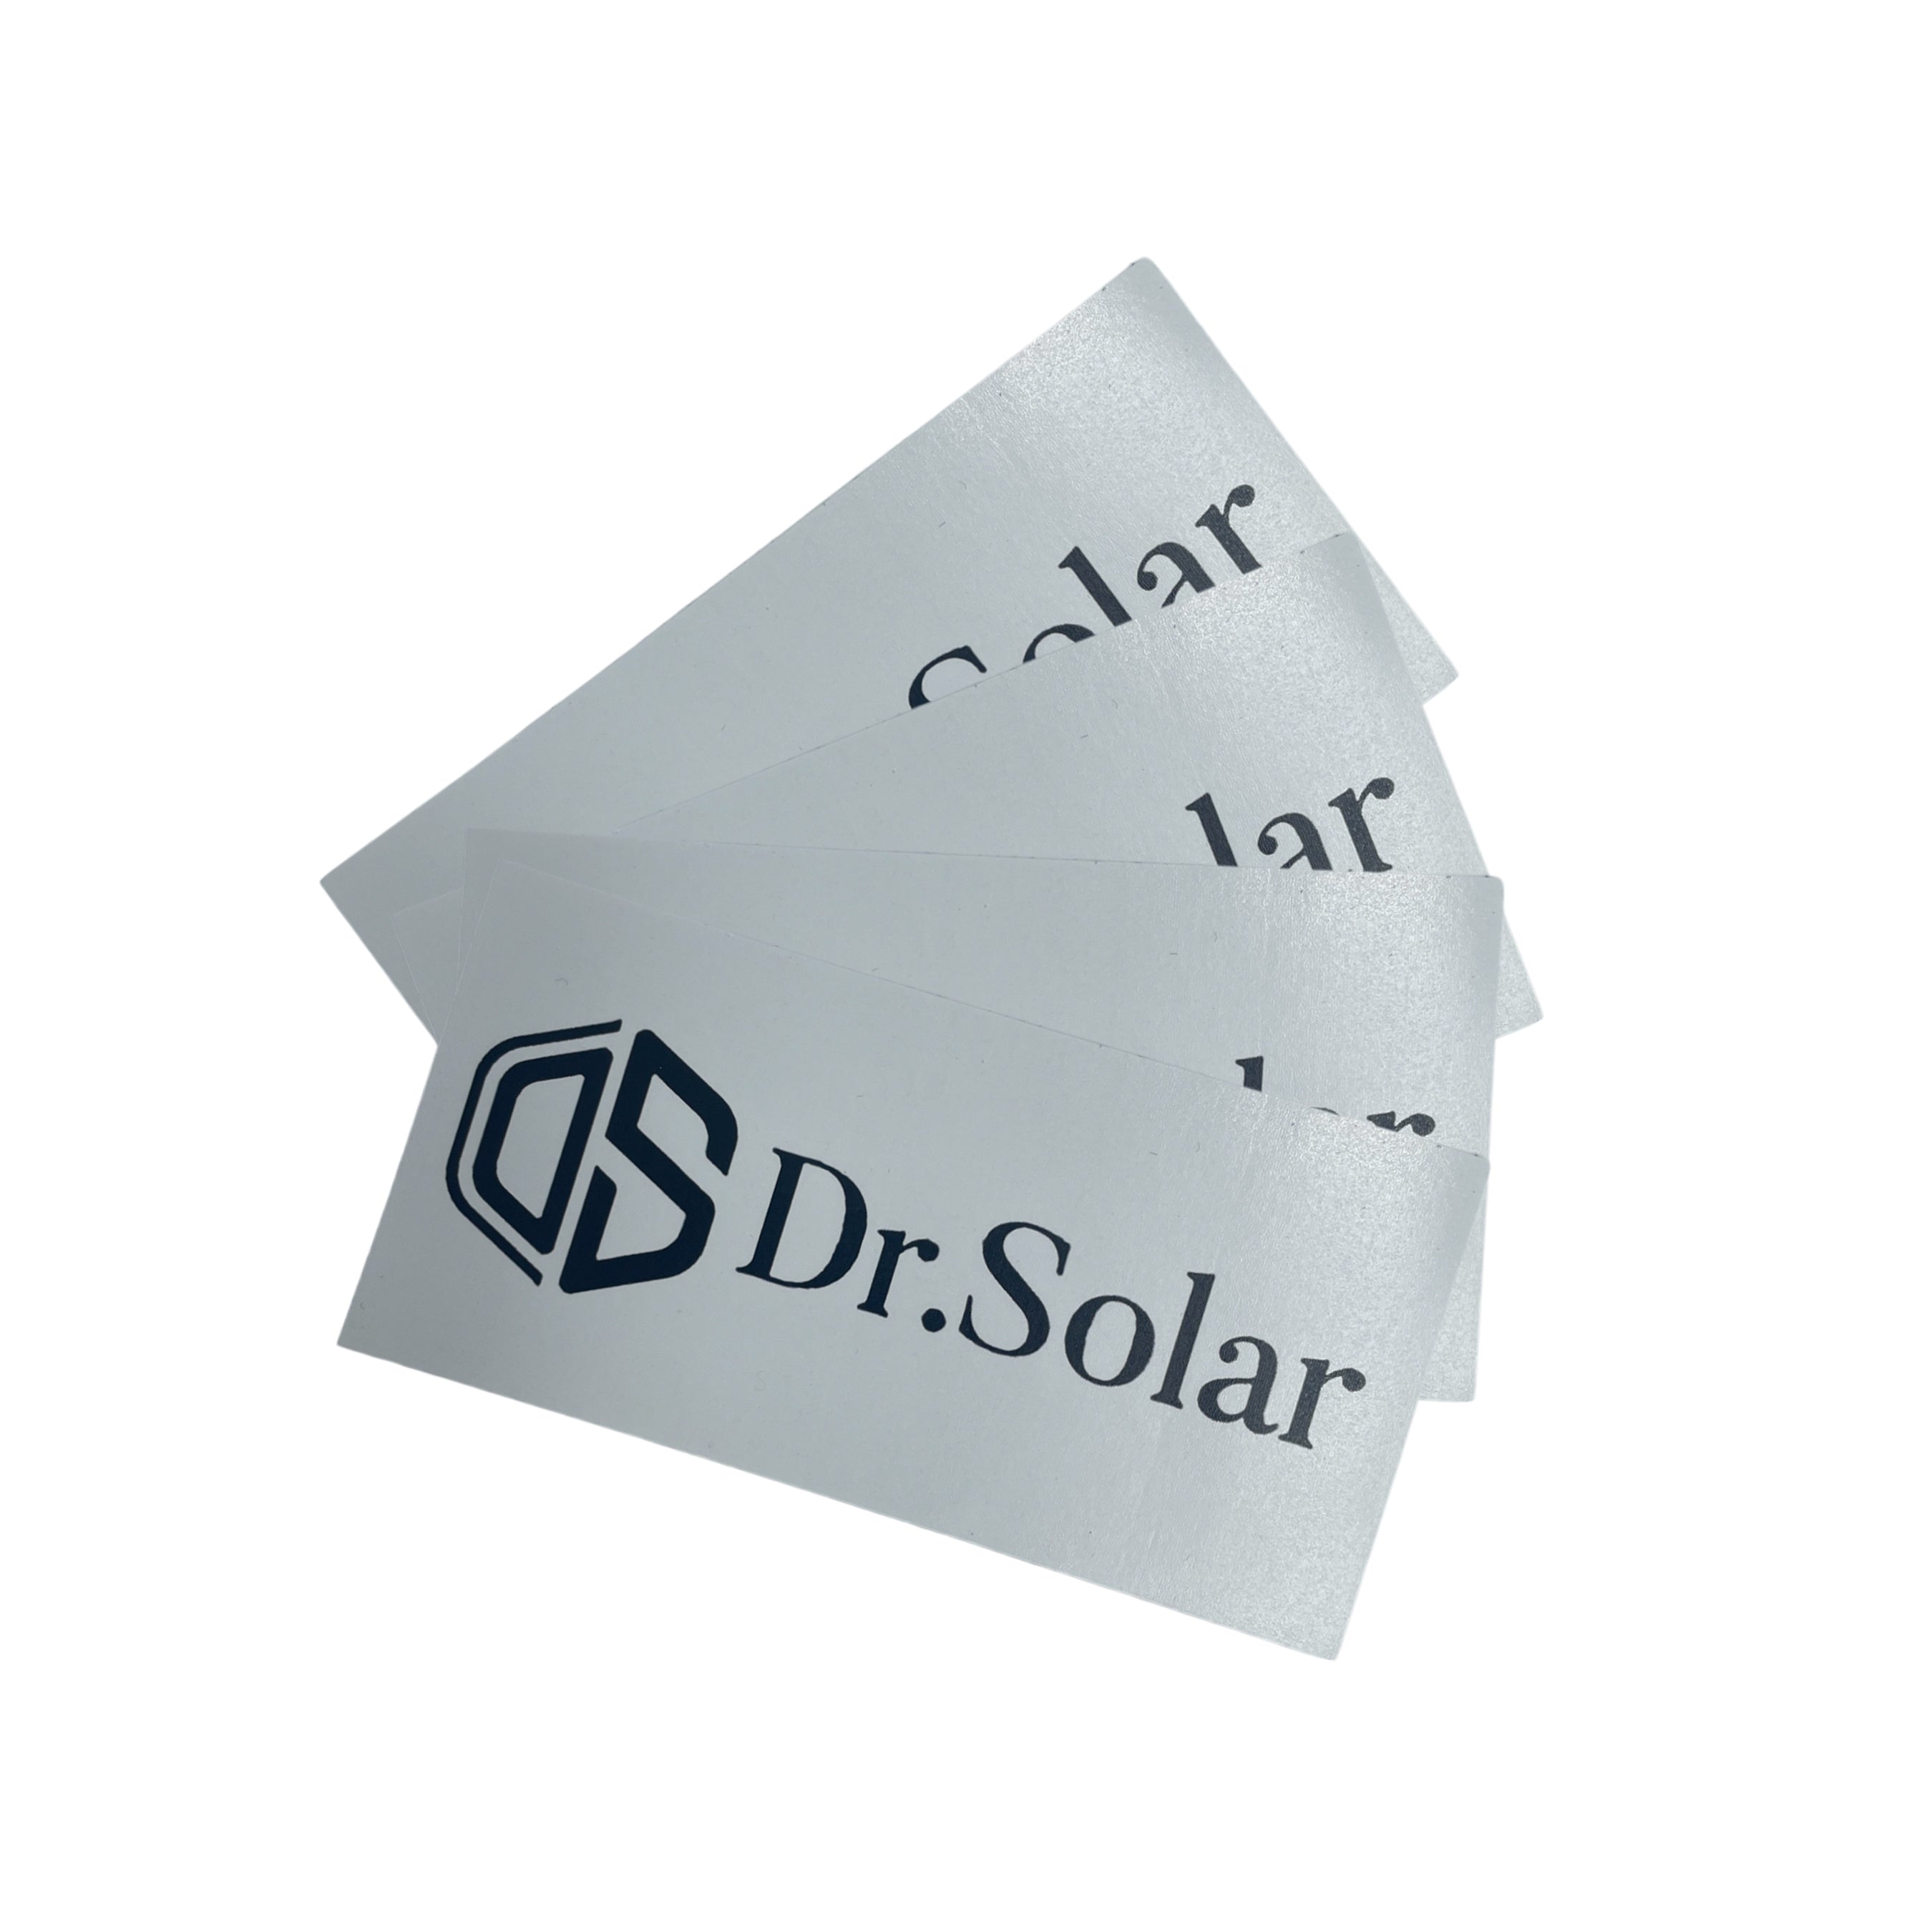 Dr.Solar Logo White Rectangle Sticker for Laptop, Journal, Notesbook, Phone, Computer, Luggage